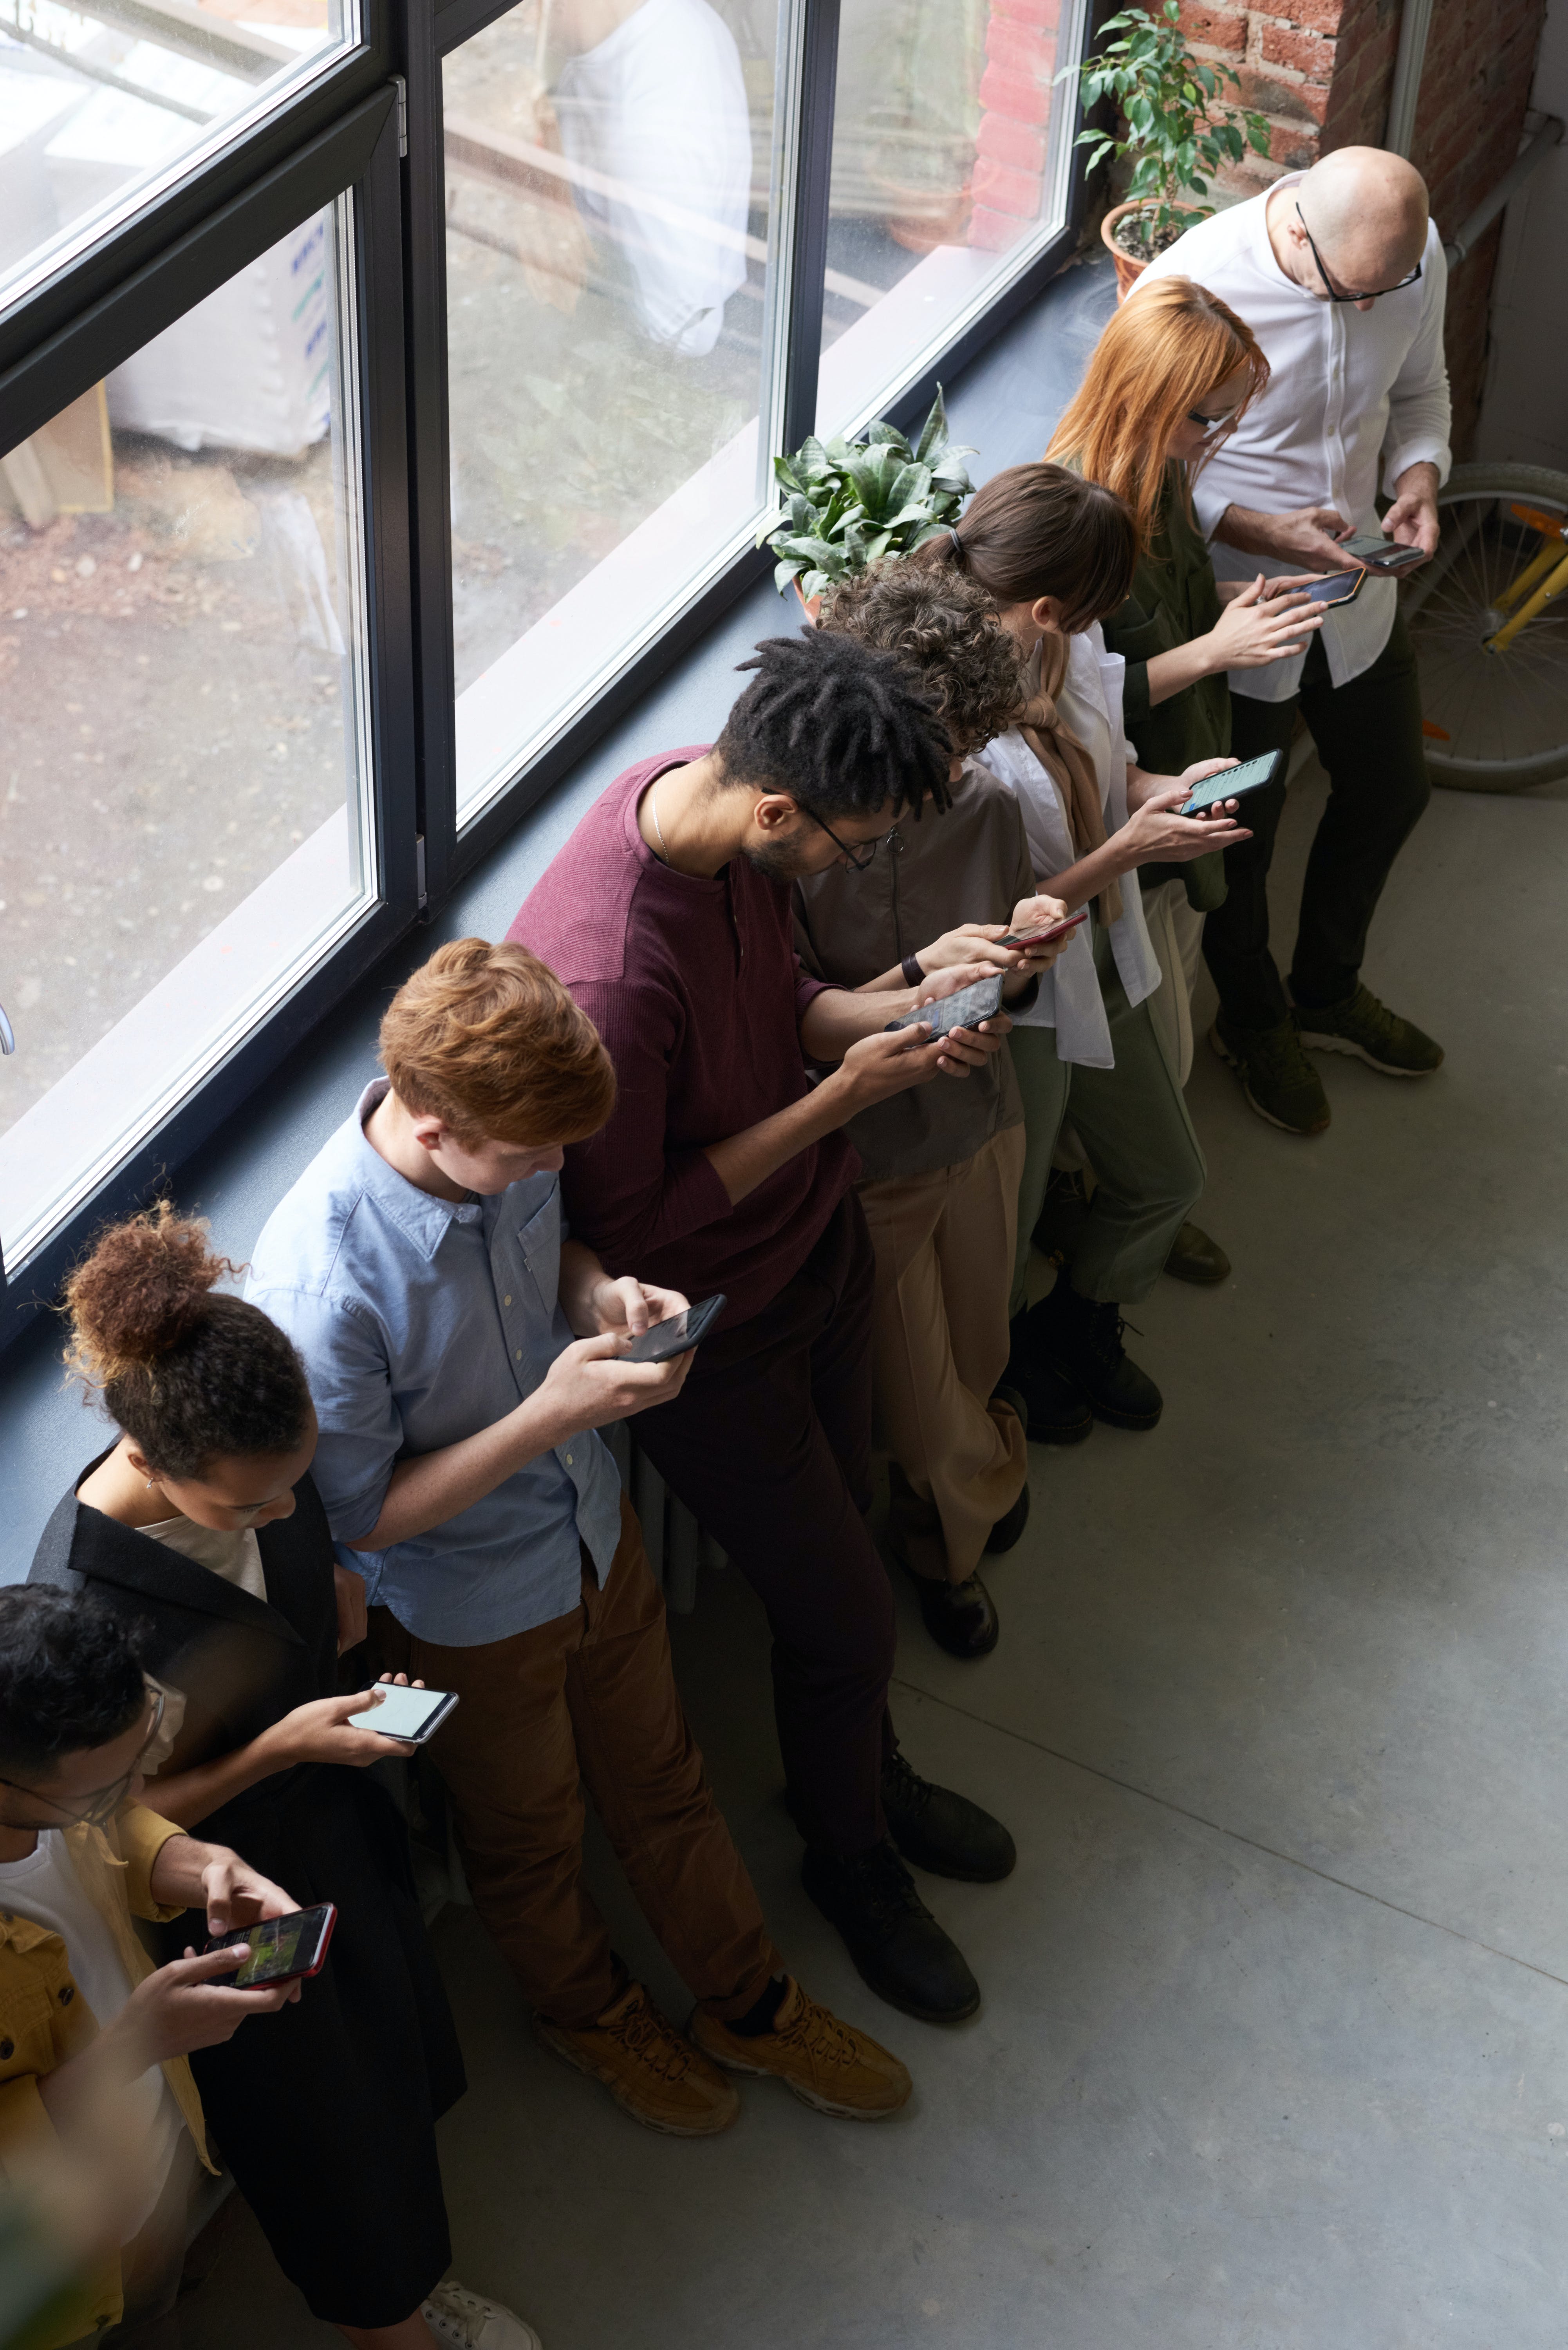 People standing in a queue while operating their smartphones. | Source: Pexels